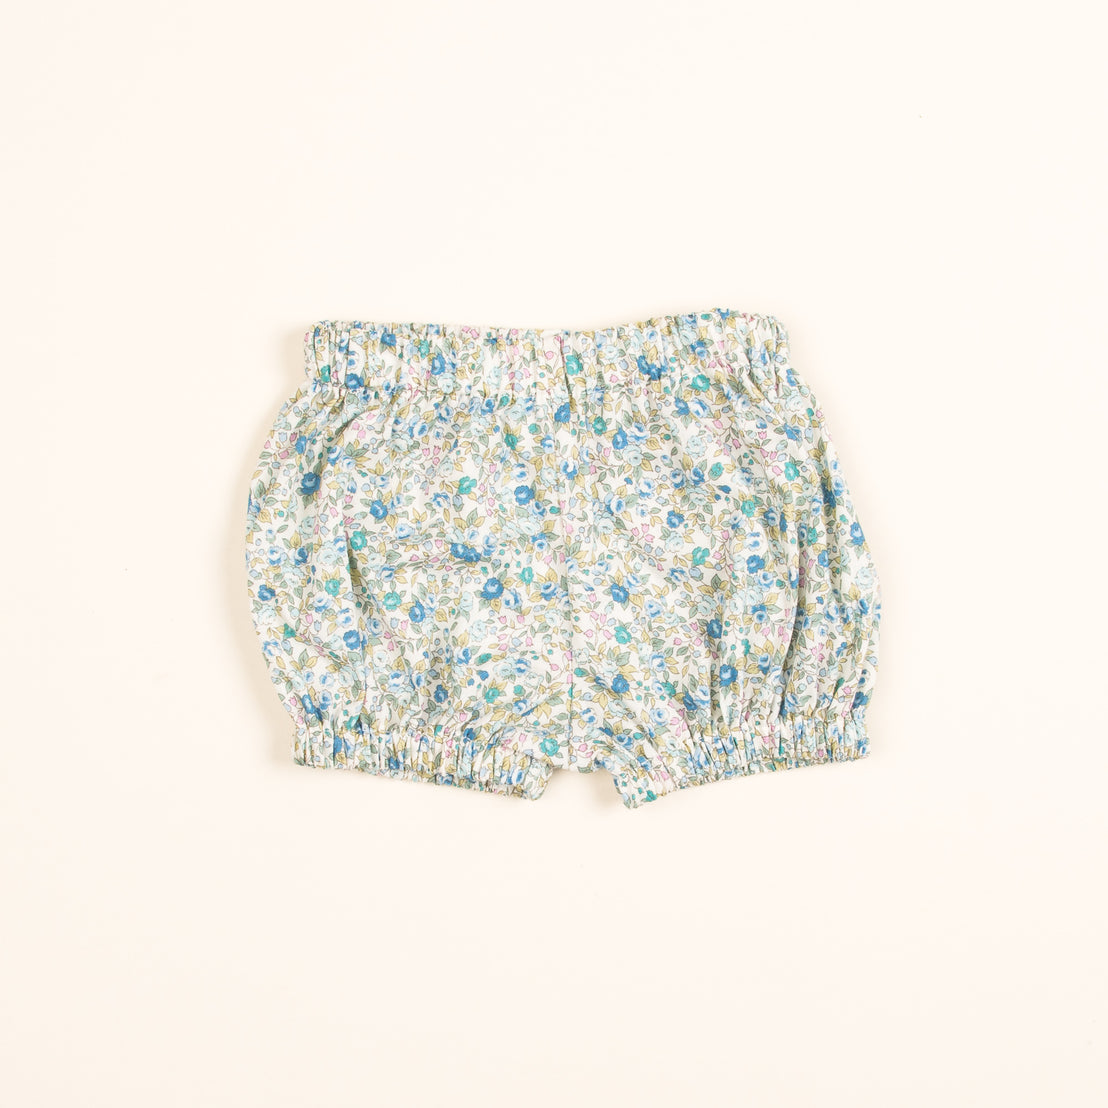 A pair of Petite Fleur Bloomers with an elastic waistband, displayed flat on a light beige background. The fabric features a delicate pattern of blue and green flowers.